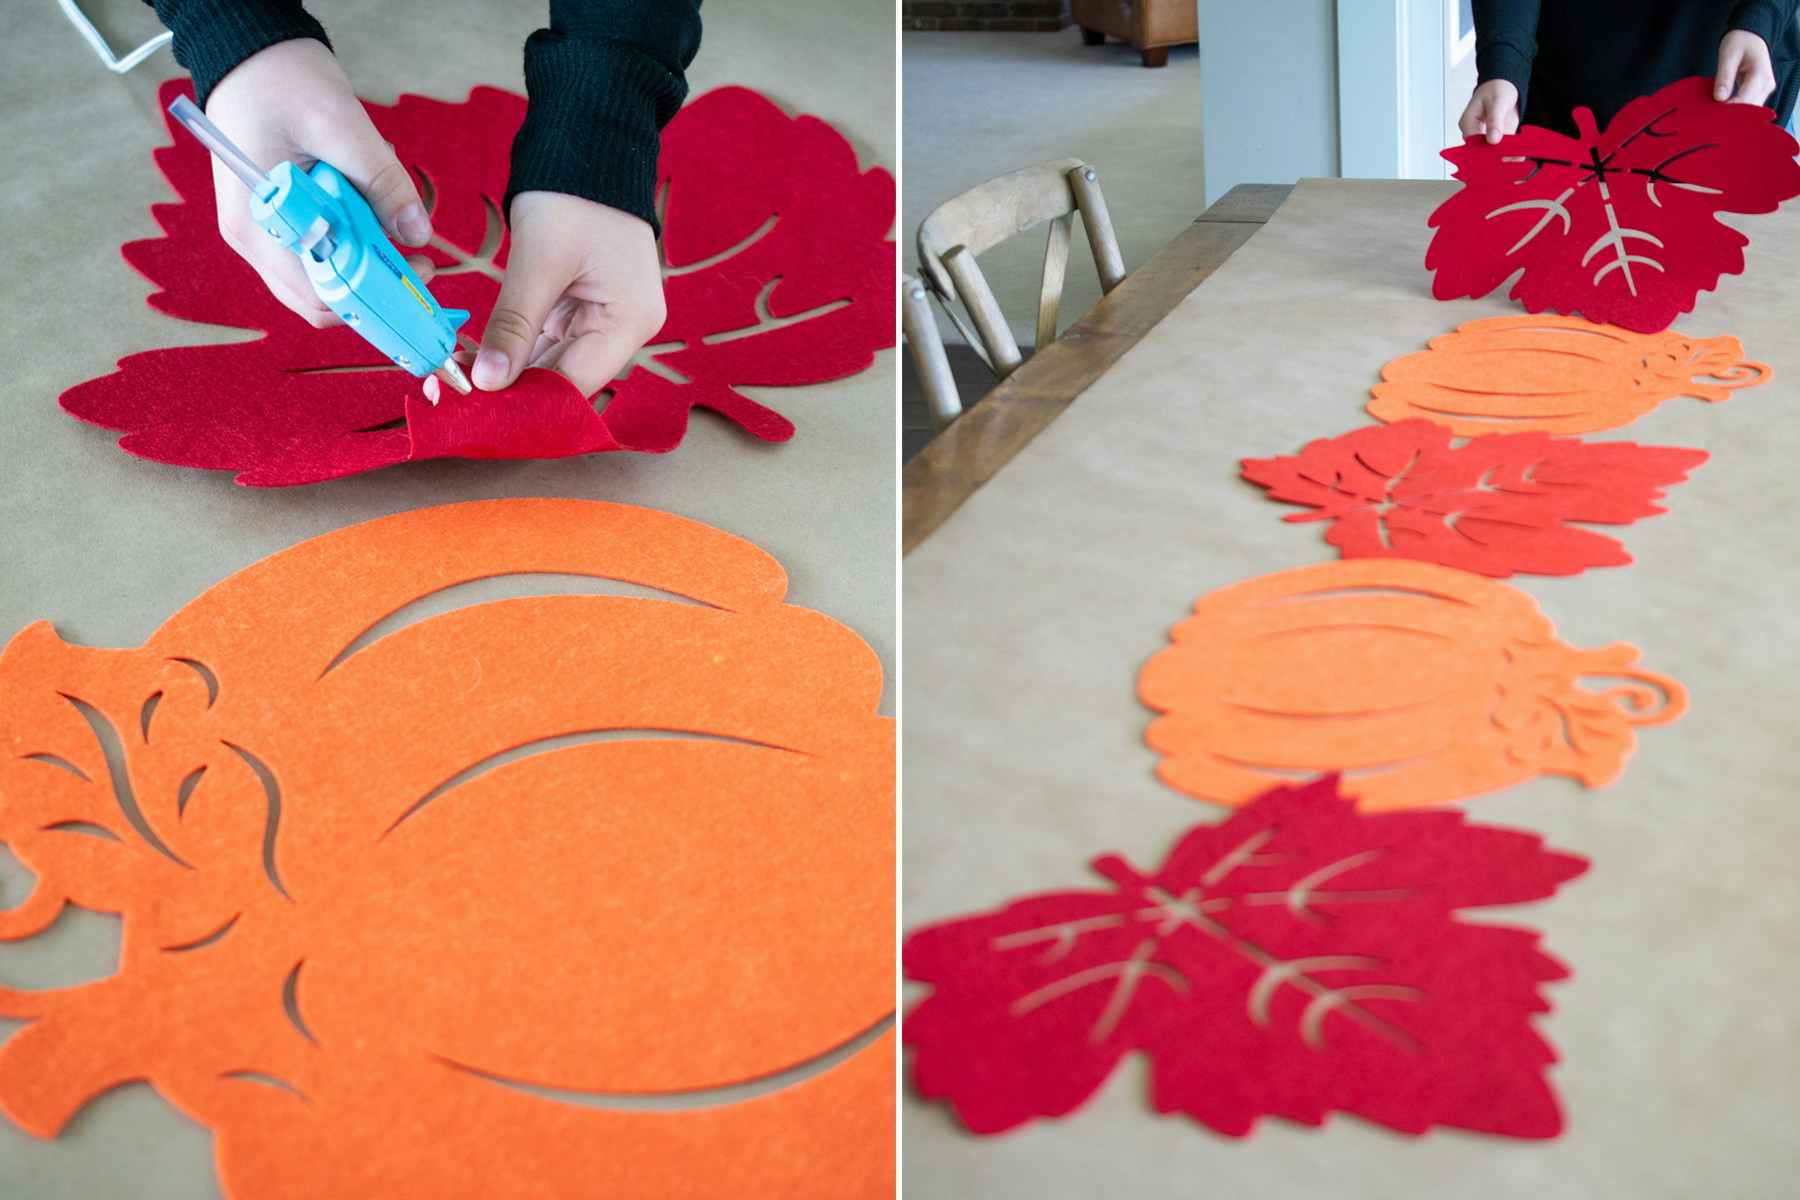 A person gluing felt leaf and pumpkin place mats together to make a table runner.